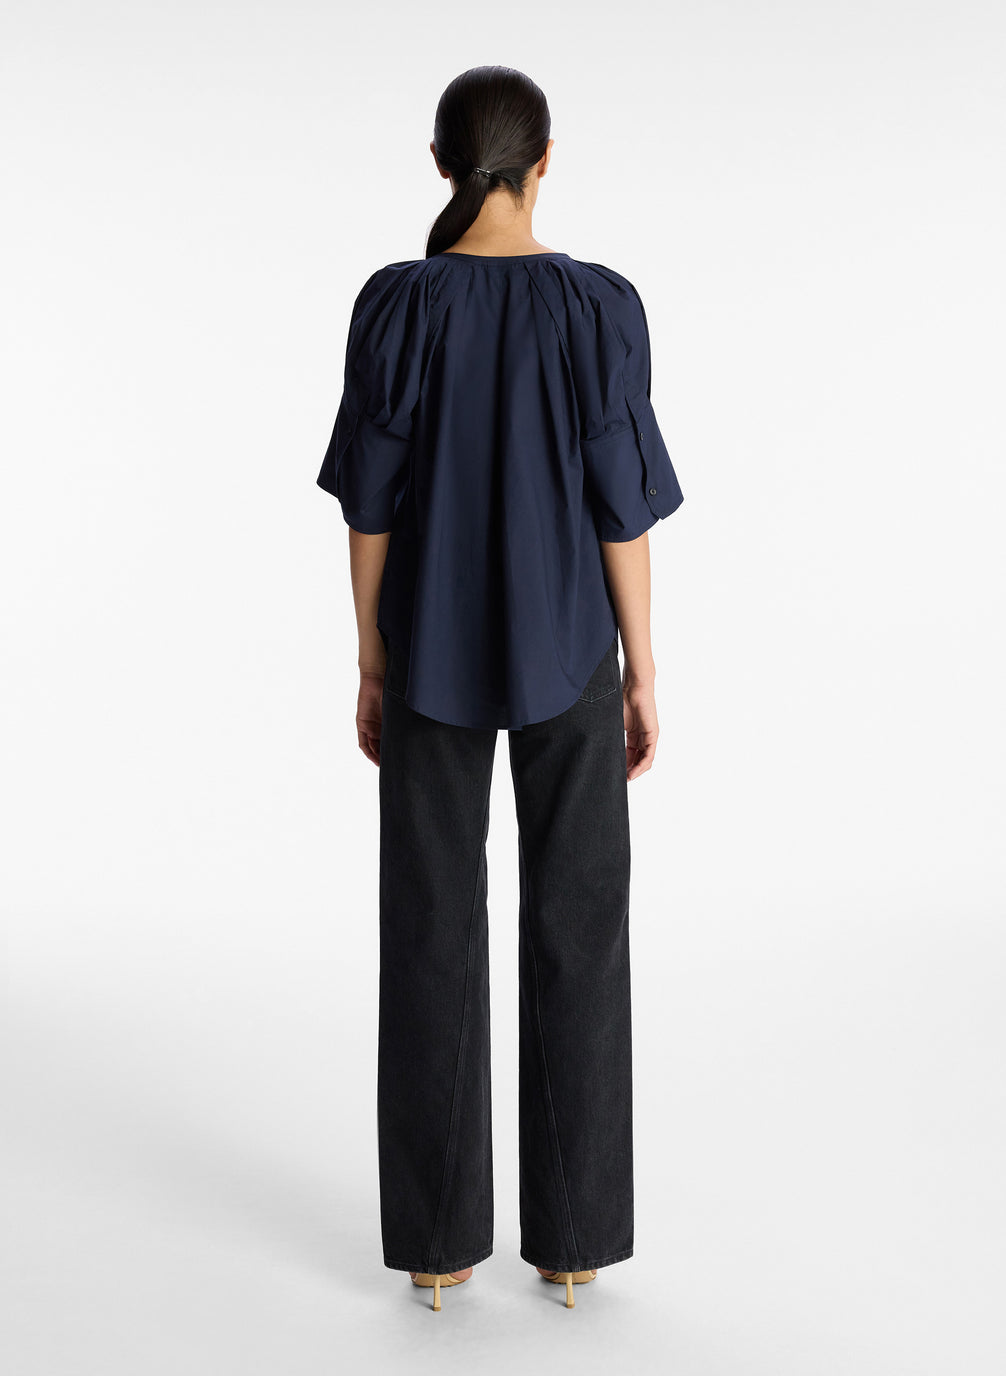 back view of woman wearing navy blue wide sleeve blouse and dark denim jeans